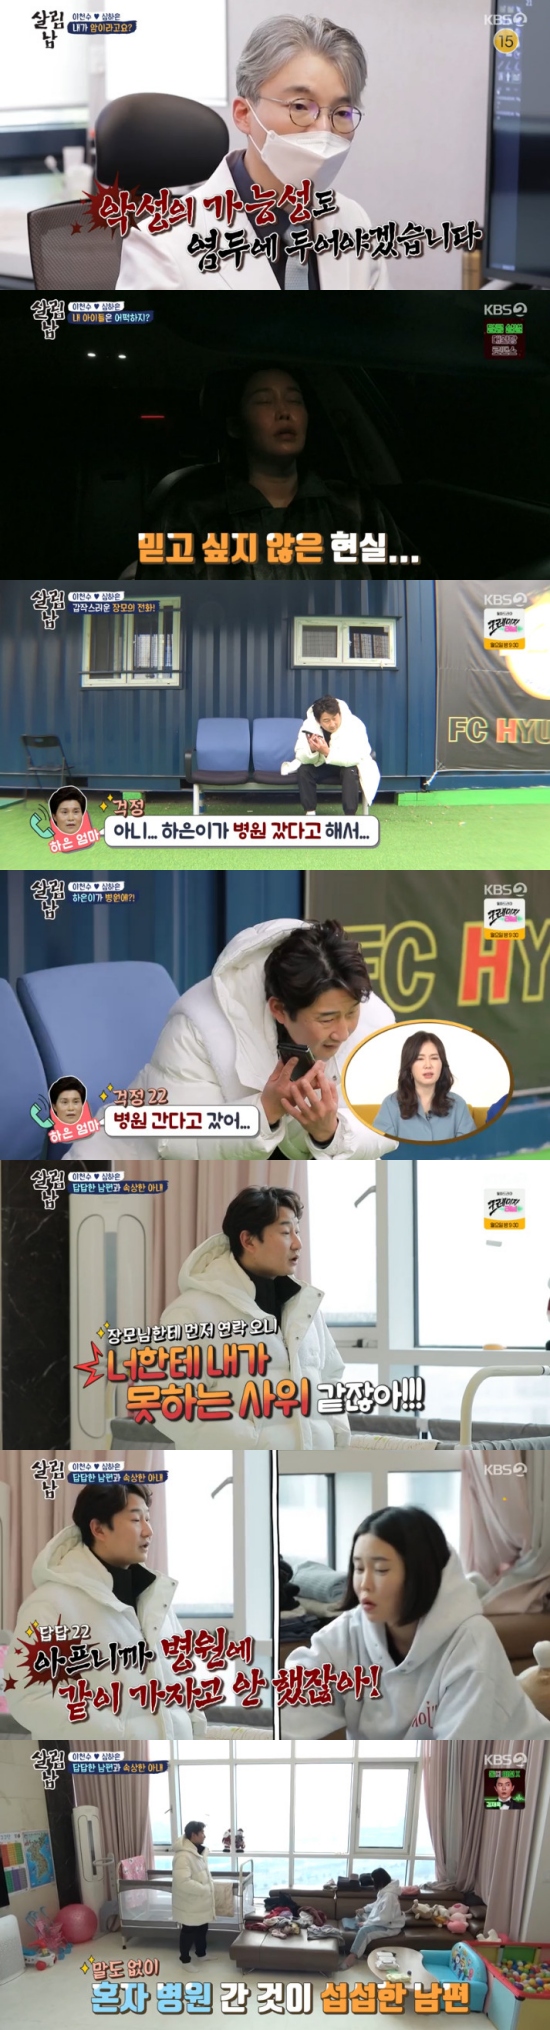 Former footballer Lee Chun-soo worried about model Shim Ha-euns health.On KBS 2TV Saving Men Season 2 broadcast on the 12th, Shim Ha-eun received a biopsy.On the day, Shim Ha-eun called his mother, Shim Ha-eun, and said, I checked her overall health last month. She said she had a lump on her neck. On her thyroid.Shim Ha-eun asked, What did this West say? And Shim Ha-eun said, I did not talk. I think Im very busy. Yesterday Im late.Shim Ha-eun mother said: Then youd have a mom going up, youd have to go to the hospital with your daughter (to Lee Chun-soo).Please call my mom later. Shim Ha-eun was examined in hospital, and the doctor said: If you check it with the naked eye only, you cant tell if its 100% cancer or not; at the moment, it seems that the possibility of malignancy should be considered.The results will be confirmed in about a week. Shim Ha-eun blushed, and said, I think a mass that may be cancer is in my body, so Im a little creepy and I do something about the kids, and my state is starting a new semester of the new year.I can not take care of my dad. I was curious and I did not want to know on the other hand, and I was scared. Also, Shim Ha-euns mother contacted Lee Chun-soo, saying, Haeun went to the hospital, she said she was having a sore throat. I went to the hospital, but there was no phone. I spoke to her on my way to the hospital.This West is good, of course, but be careful. Call me. Lee Chun-soo reassured me, Dont worry too much. Ill be right there. Lee Chun-soo headed home straight away, and mentioned that a call had been made to his mother, Shim Ha-eun, who said: You dont seem like a man you cant.Why did you go? You asked me what my schedule was. I didnt ask you to go to the hospital.I am sad for my position, he said.Lee Chun-soo said, I need to know that Wife is sick. What is the story that I can not tell? Shim Ha-eun said, I do not do it.I tried to talk, but I was busy and busy, and I had to be able to talk about it late. After all, Shim Ha-eun said, My neck hurts. Ive had a lump in my neck. Ive been through a biopsy.Its a big size, so you have to do a biopsy. What about a biopsy. Lets see if its cancer or not. Lee Chun-soo said, Cancer? What cancer. I didnt know. If I knew, would I? I lost a lot of weight and had good color.Lee Chun-soo told the production team, When I told you about cancer, I thought, Its going to be a big deal. The person I accompanied died of cancer.I was the next to him. There is something sensitive about cancer. Lee Chun-soo later visited the hospital with Shim Ha-eun, and the doctor said, I did not see cancer cells once.However, if you check the water again in about a month or so, and if you see water at a rapid rate or a lump, you may need surgery for surgical removal and treatment and diagnosis. That evening Lee Chun-soo gave Shim Ha-eun a massage, and said, There is a feeling of energy, its a good result because we go together.I will do it this evening because I am tired. Lee Chun-soo made egg fried rice, and Shim Ha-eun confessed, I cant adapt to this like today, thank you, but Im afraid of breaking at some point.Lee Chun-soo expressed his affection, saying, Tell me when you want to eat egg rice.Photo = KBS Broadcasting Screen